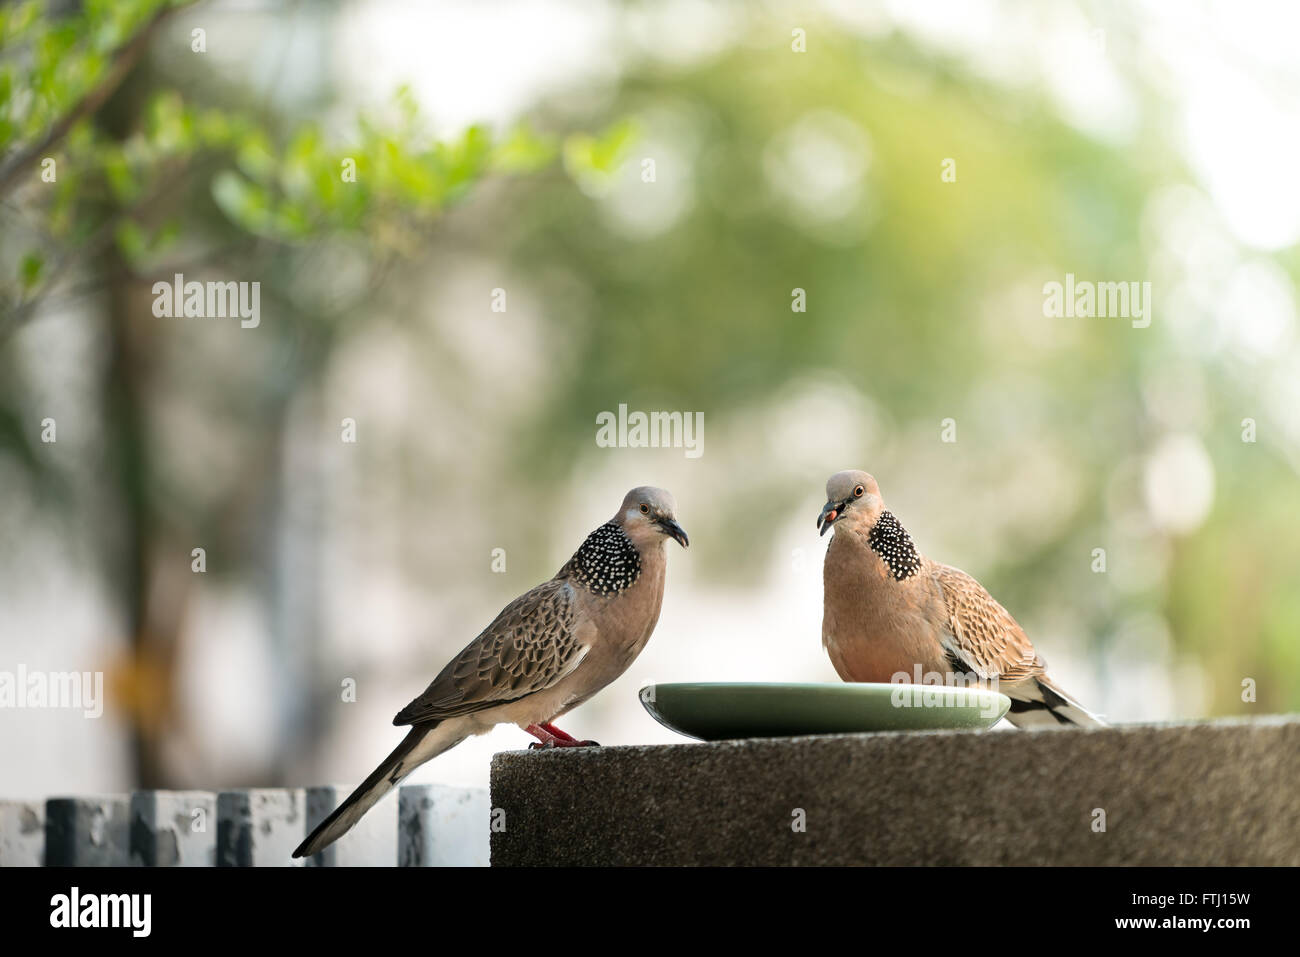 Sharing food to birds, two pigeons eating Stock Photo